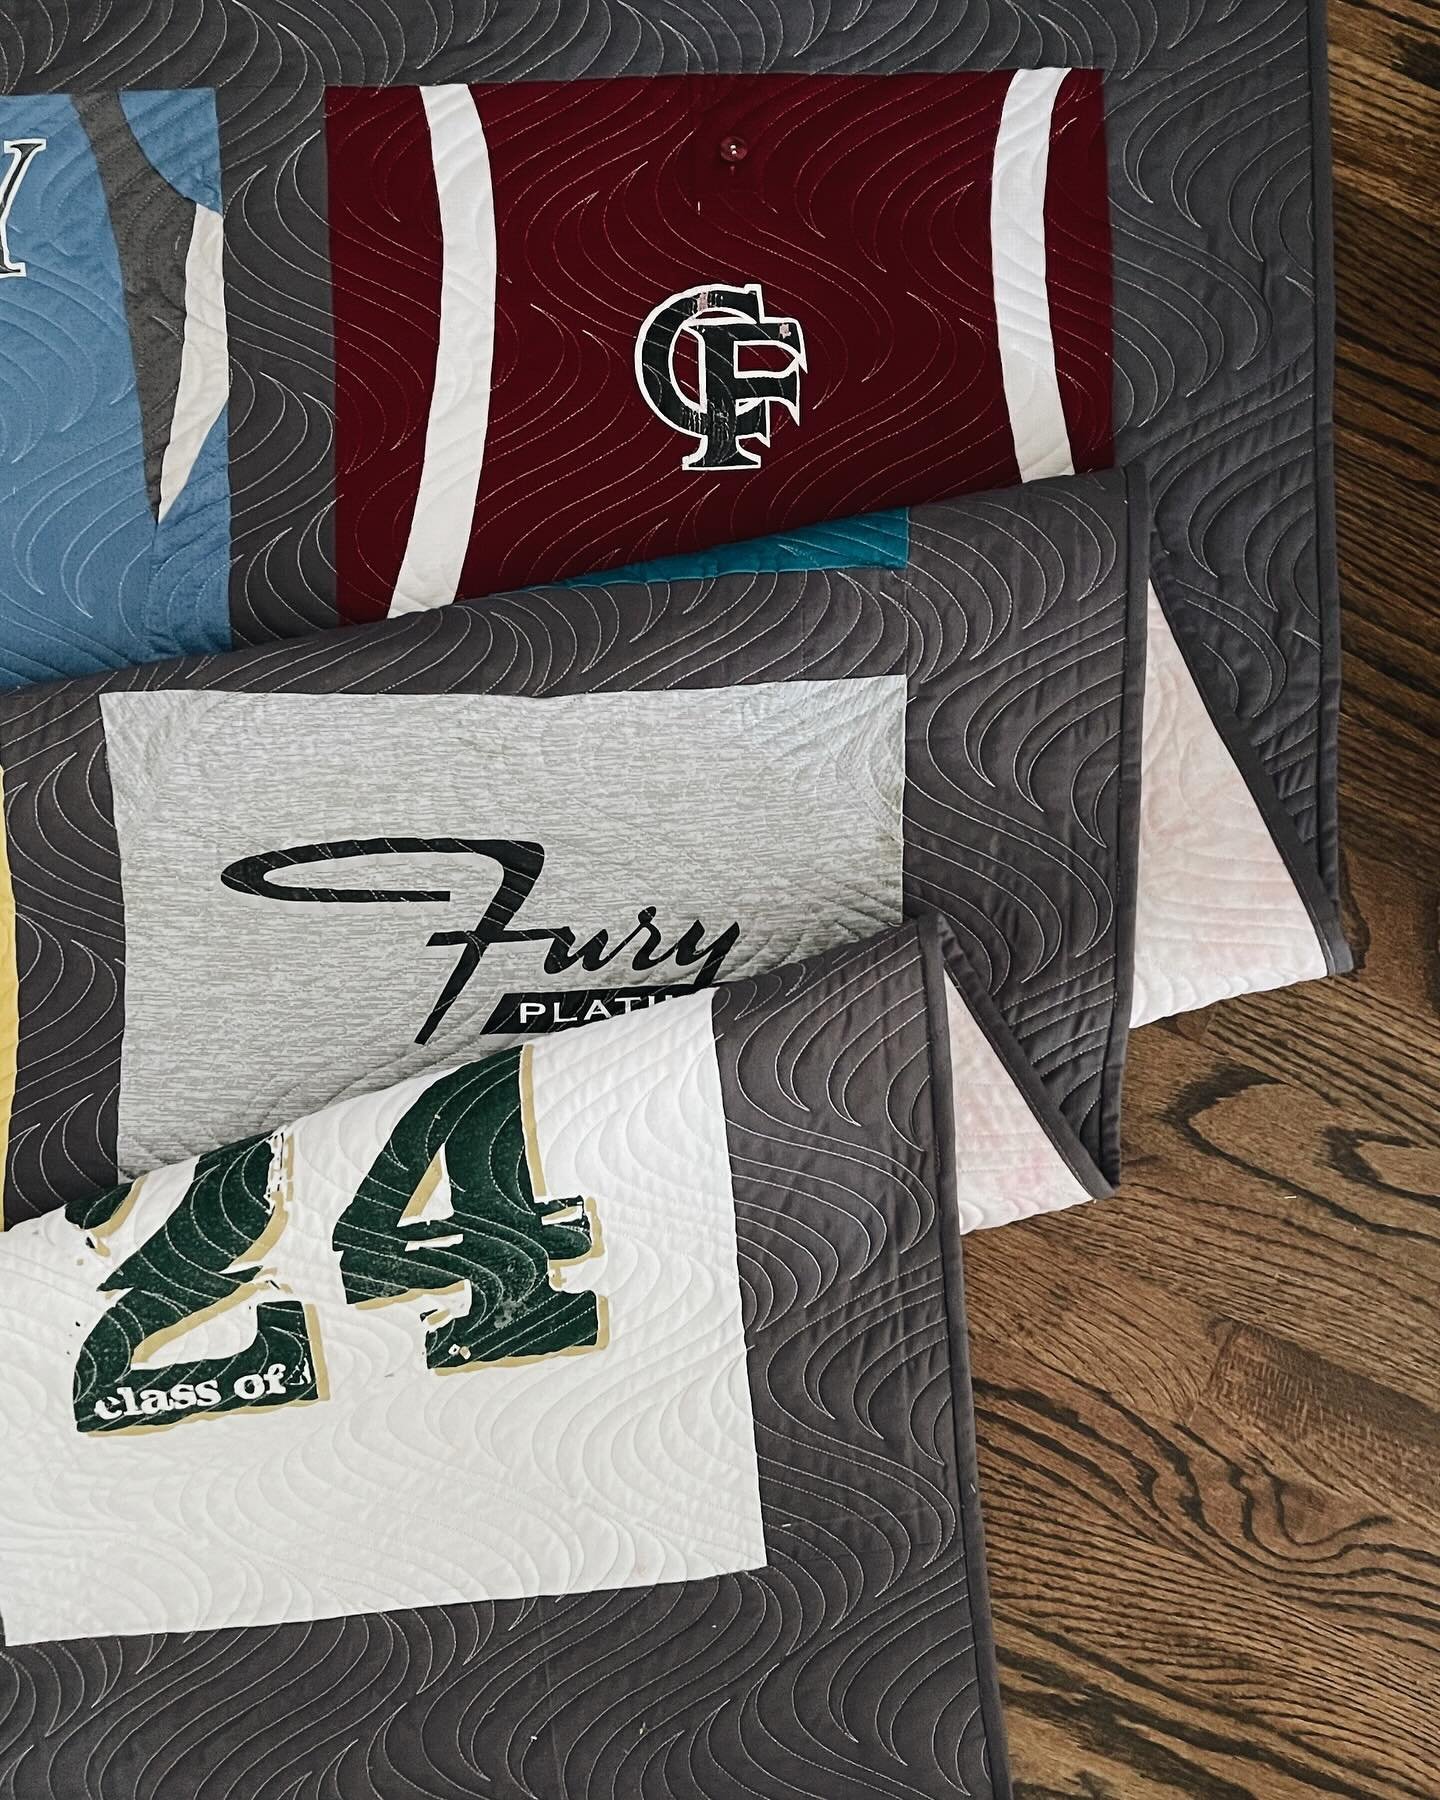 &ldquo;In softball, as in life, the secret to success is teamwork.&rdquo; &ndash; Lisa Fernandez
 
Capturing Kennedy&rsquo;s lifetime of teamwork, growth, dedication, and love for the game. Wishing you the best! 

Custom #tshirtquilt for @stinson6509